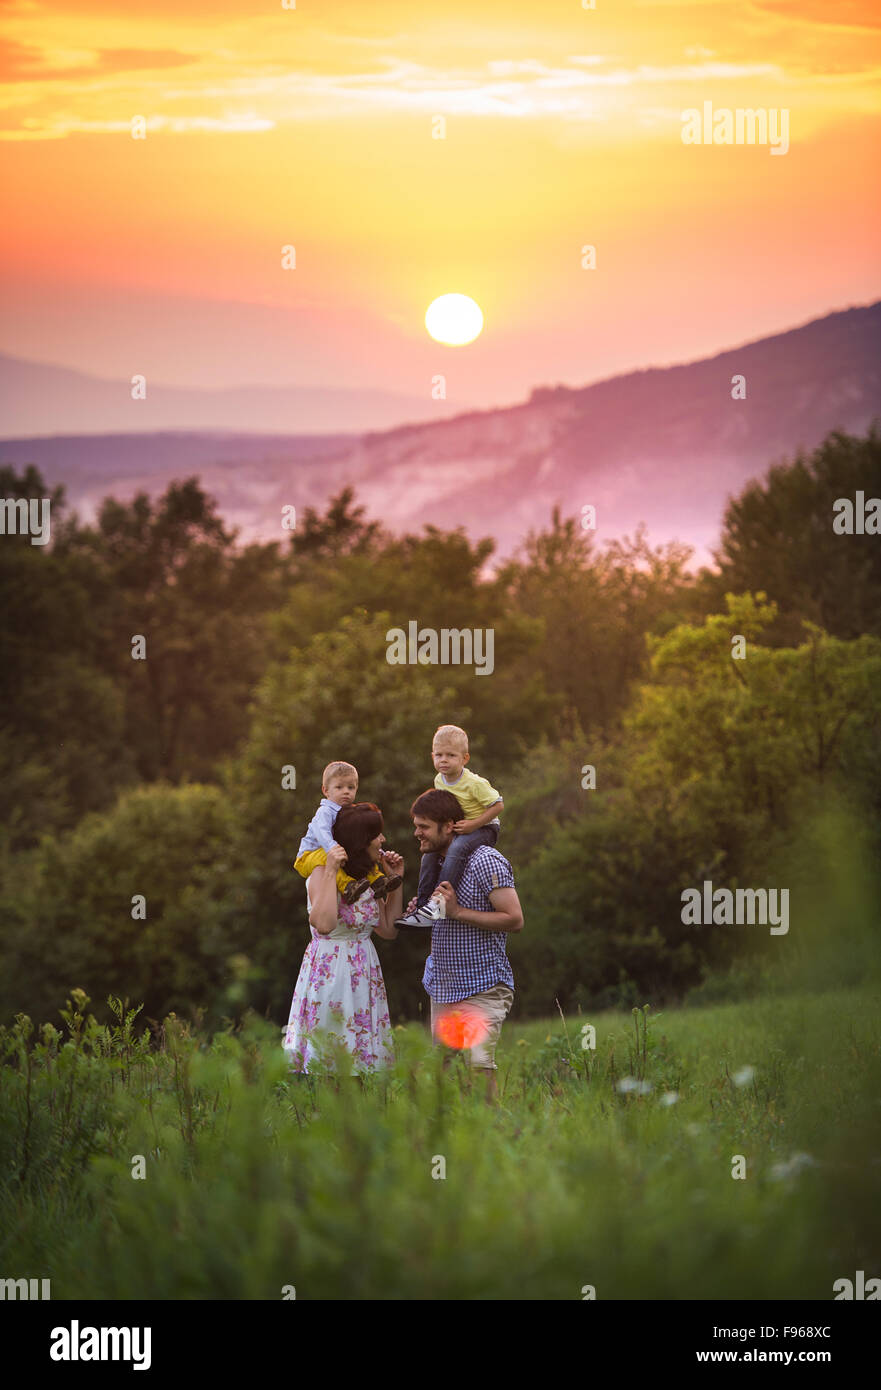 Happy young family have fun together in nature in sunset field Stock Photo